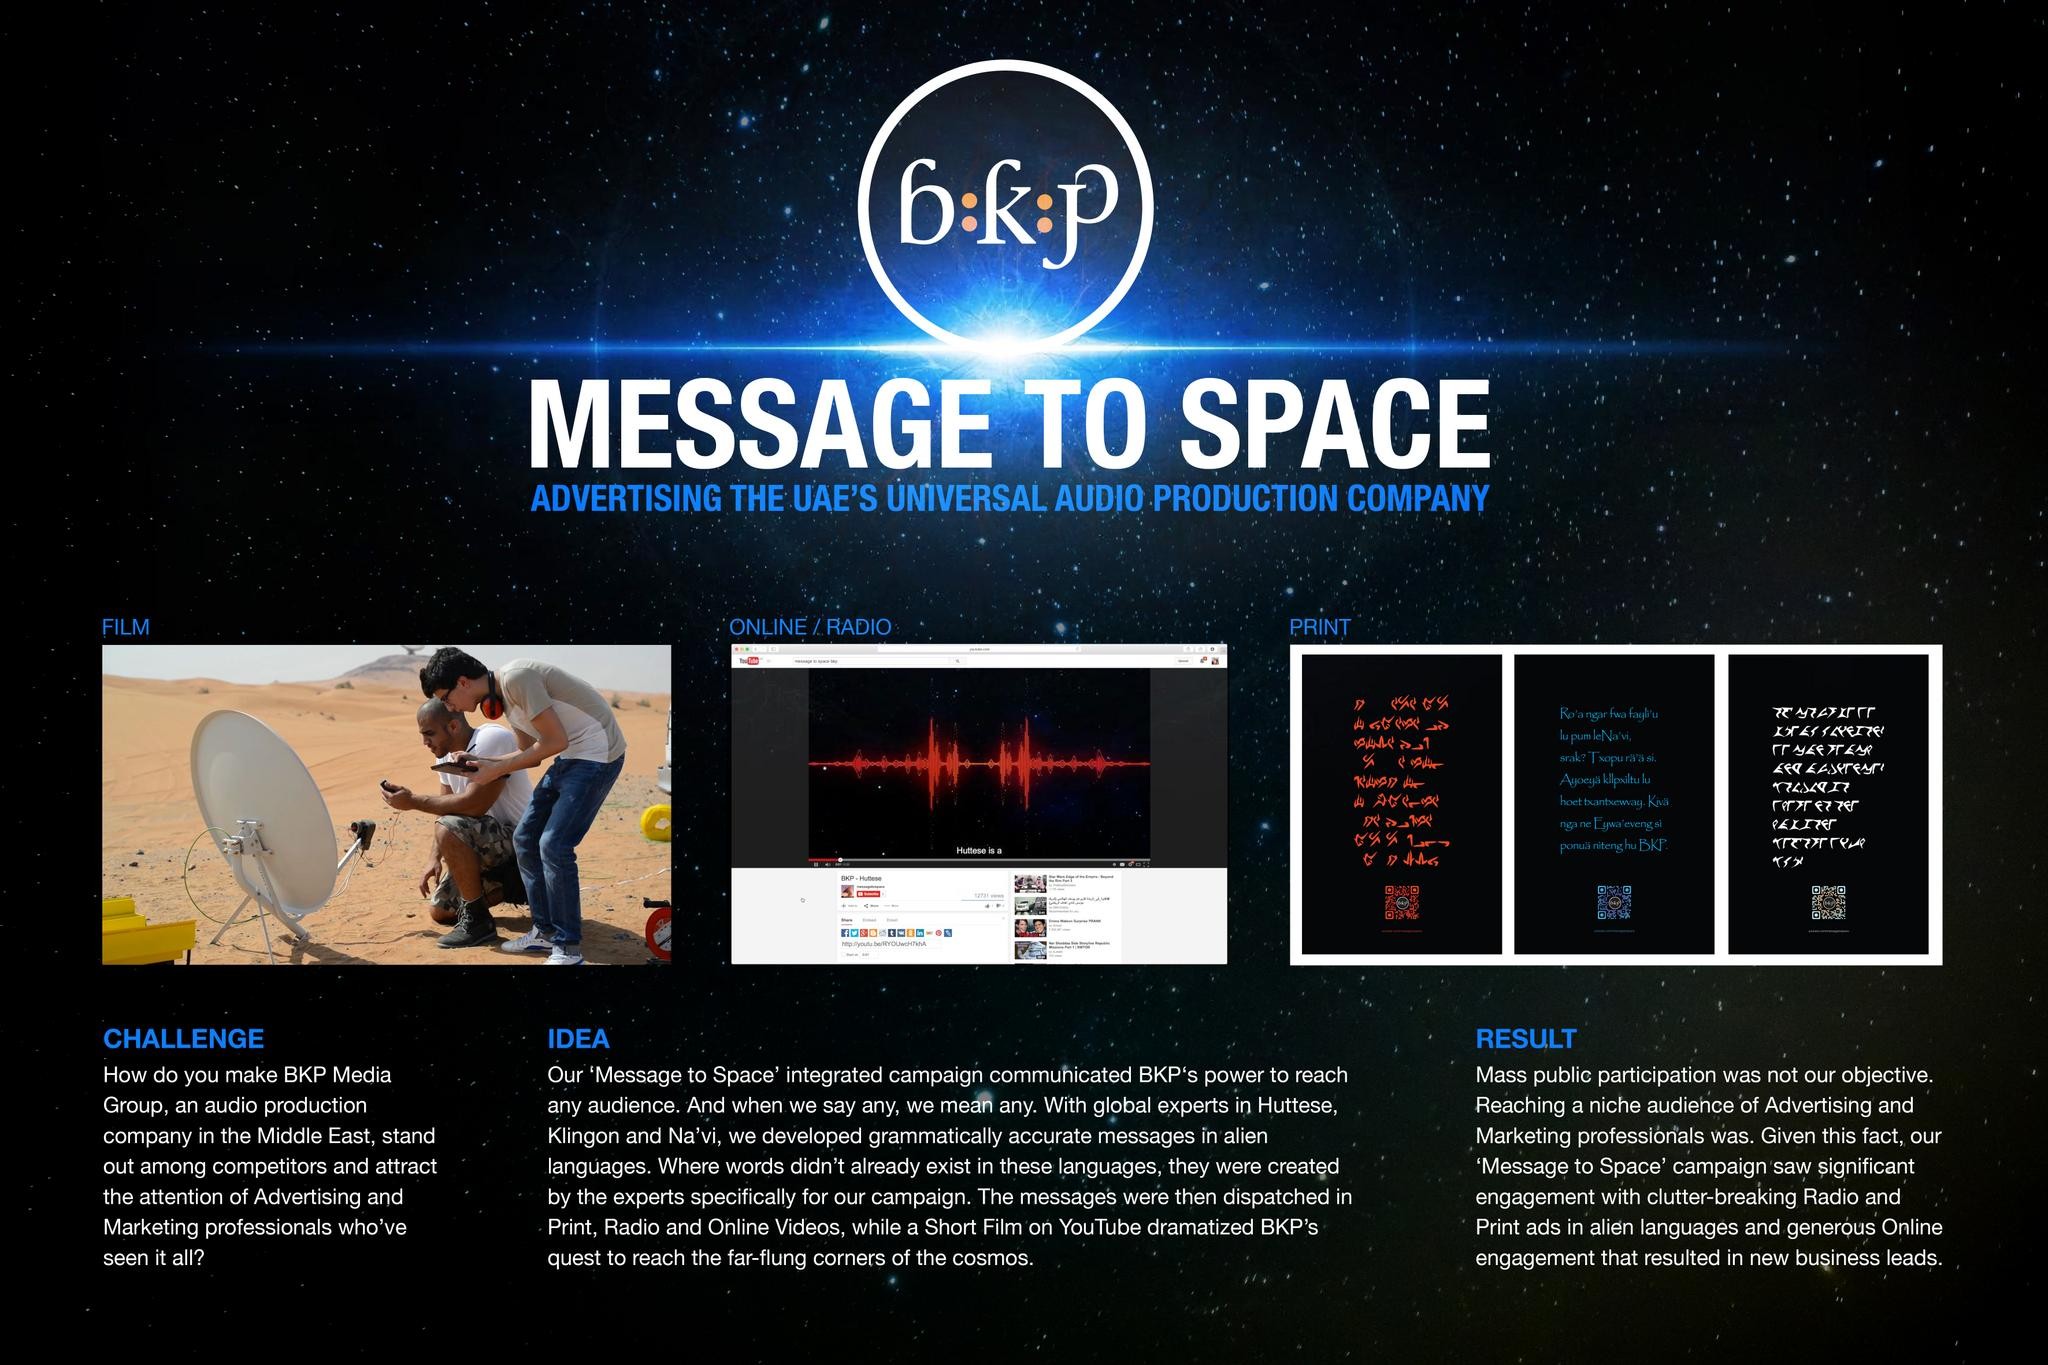 BKP MESSAGE TO SPACE